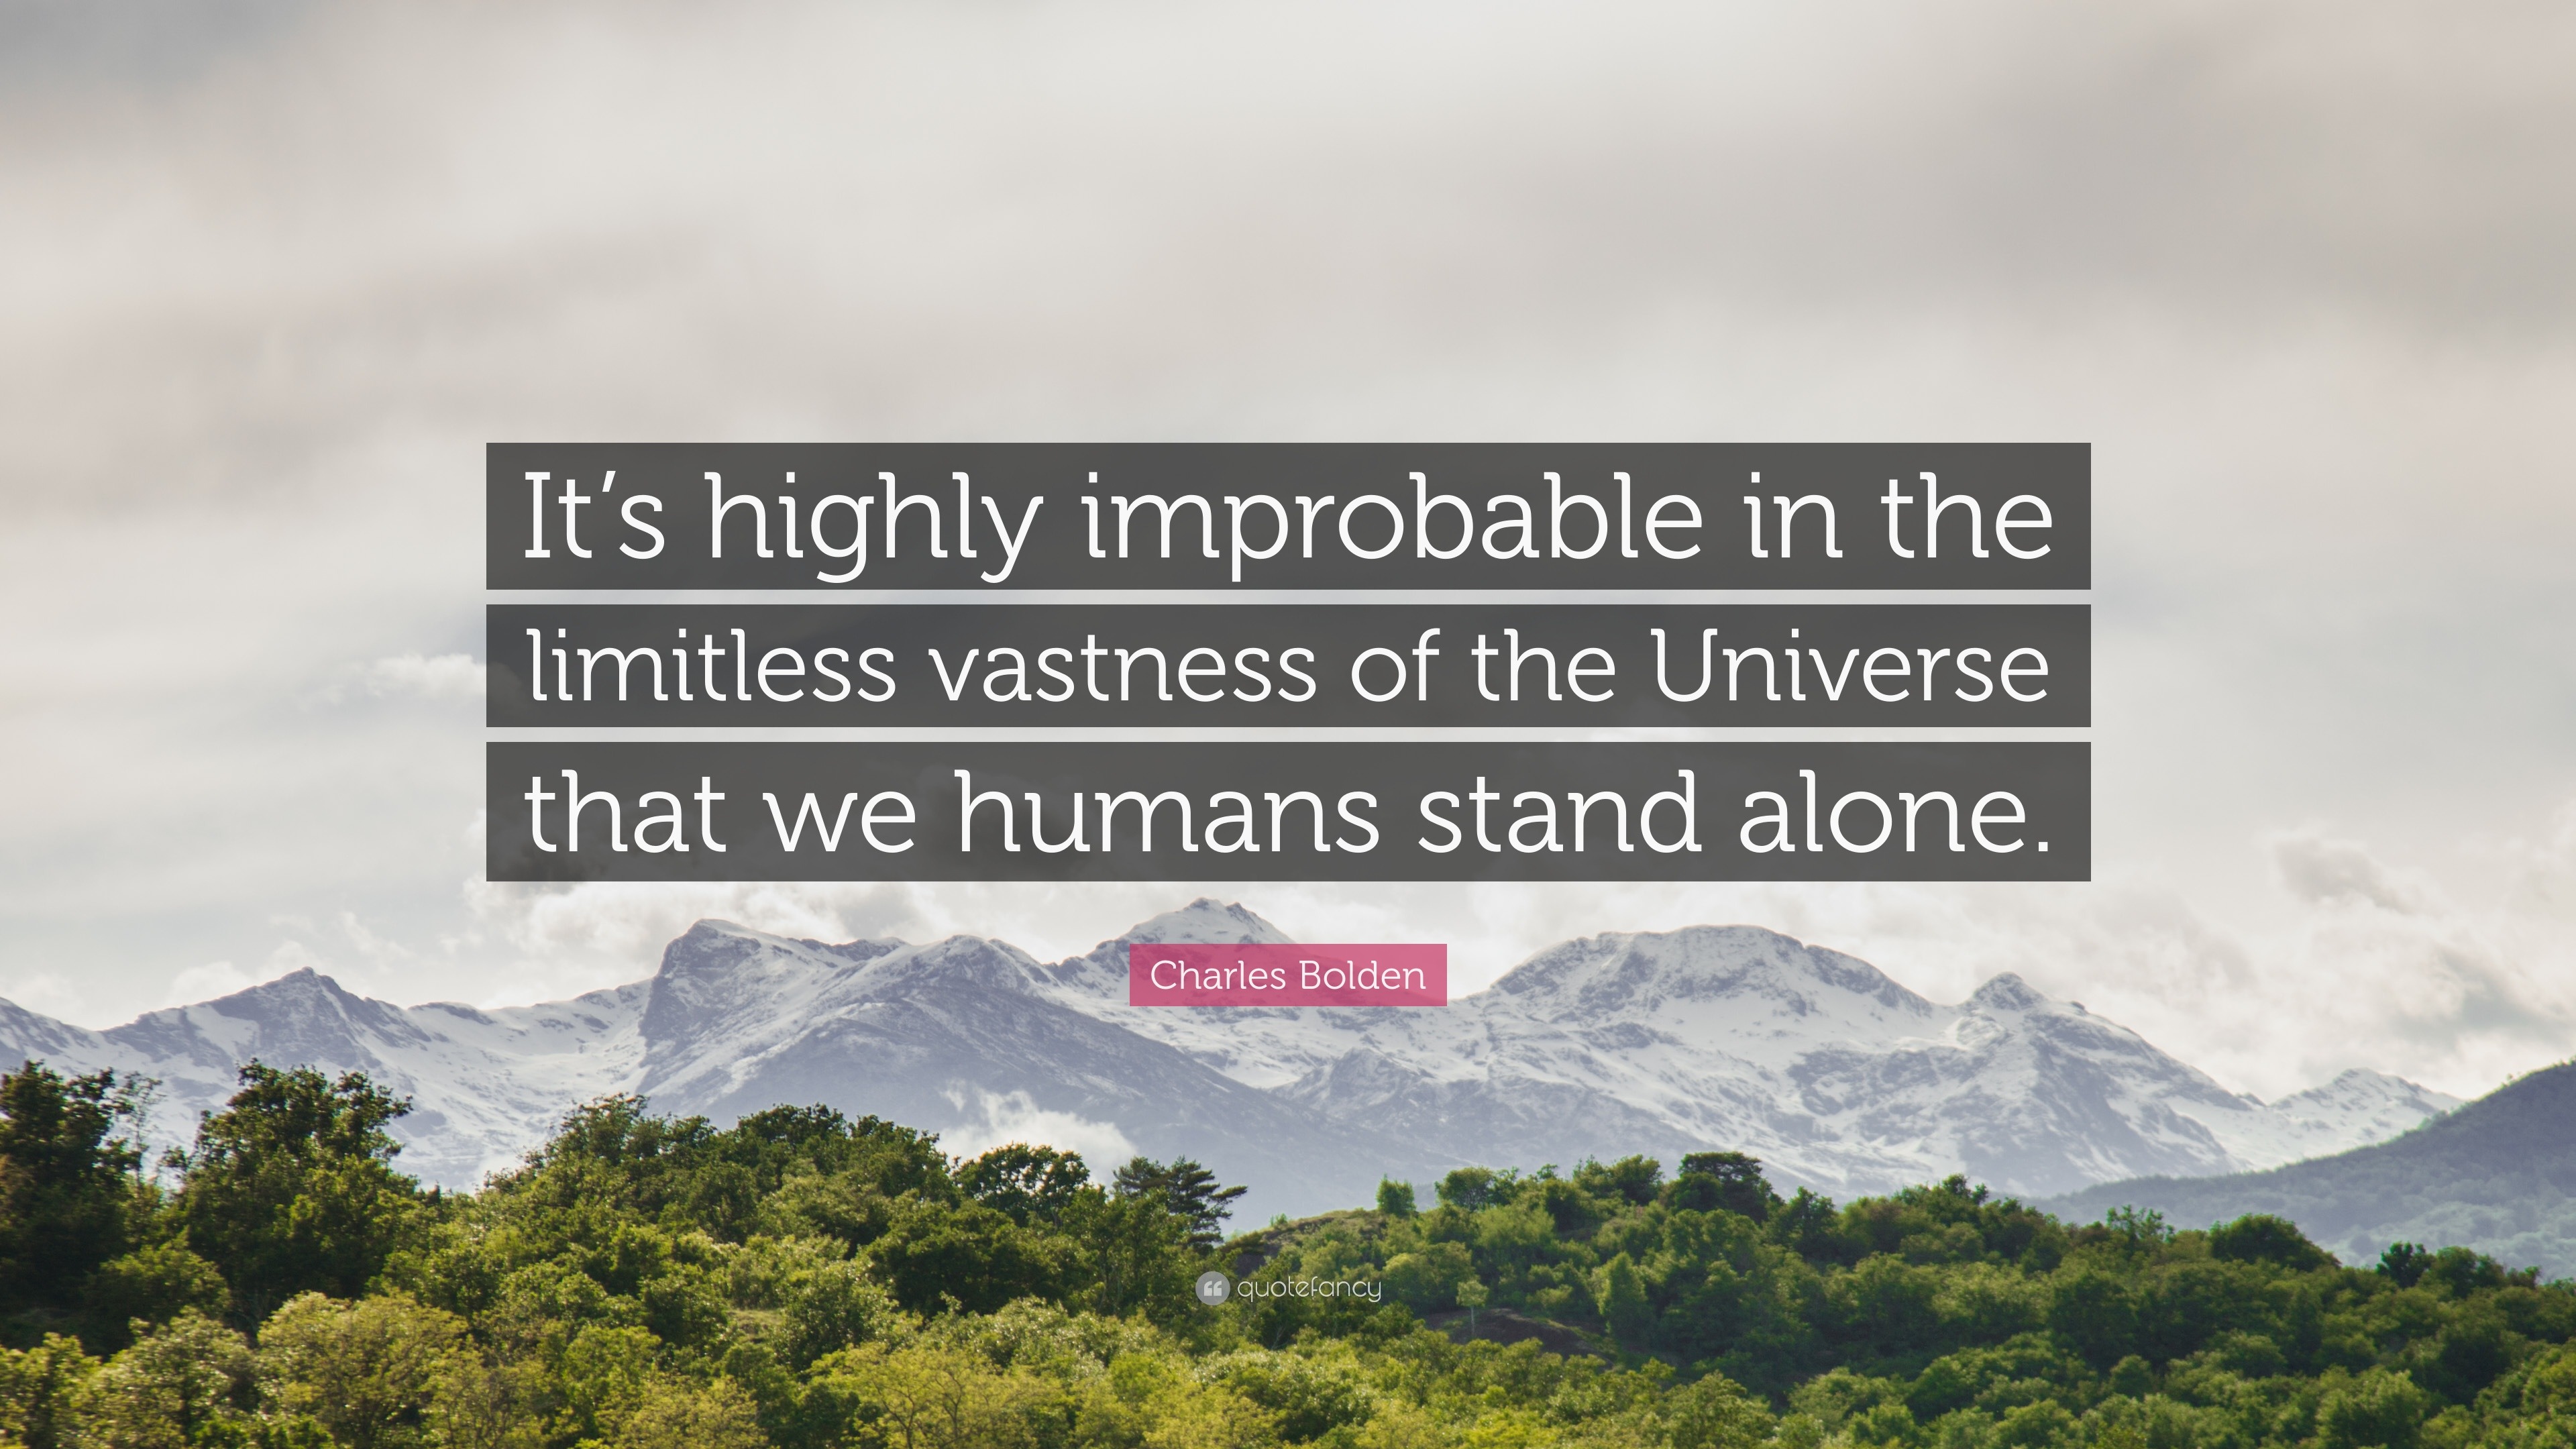 Charles Bolden Quote: “It's highly improbable in the limitless